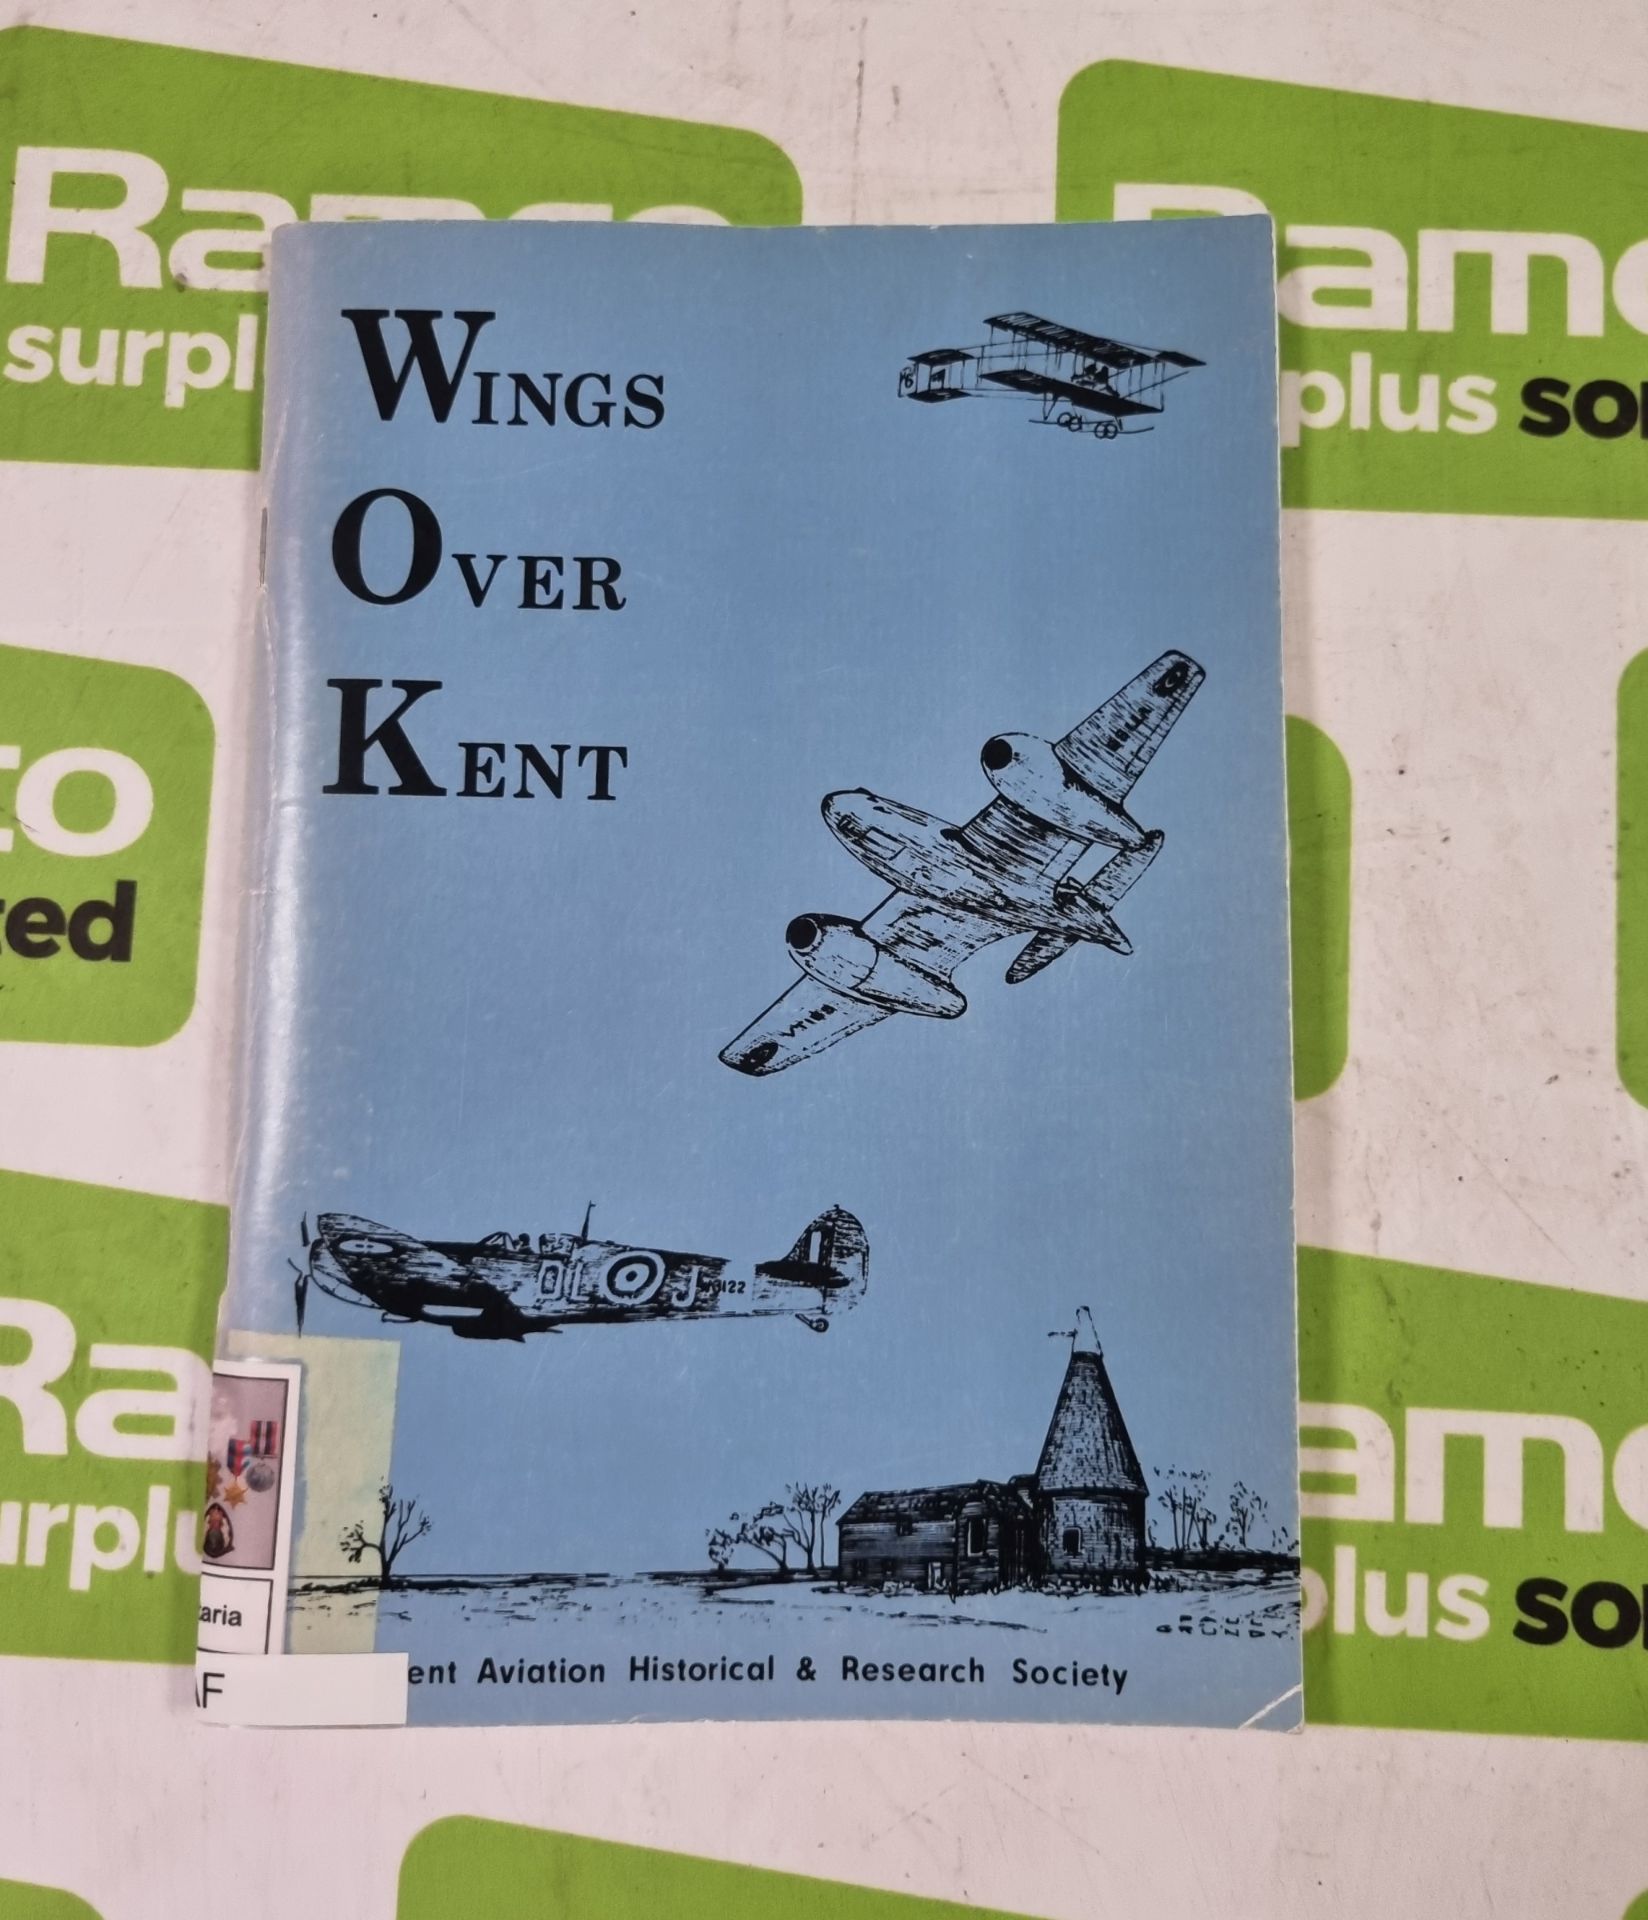 Flight in Kent by Kent Aviation Historical & Research Society, Gravesend at War Series, No 6 - - Image 9 of 23